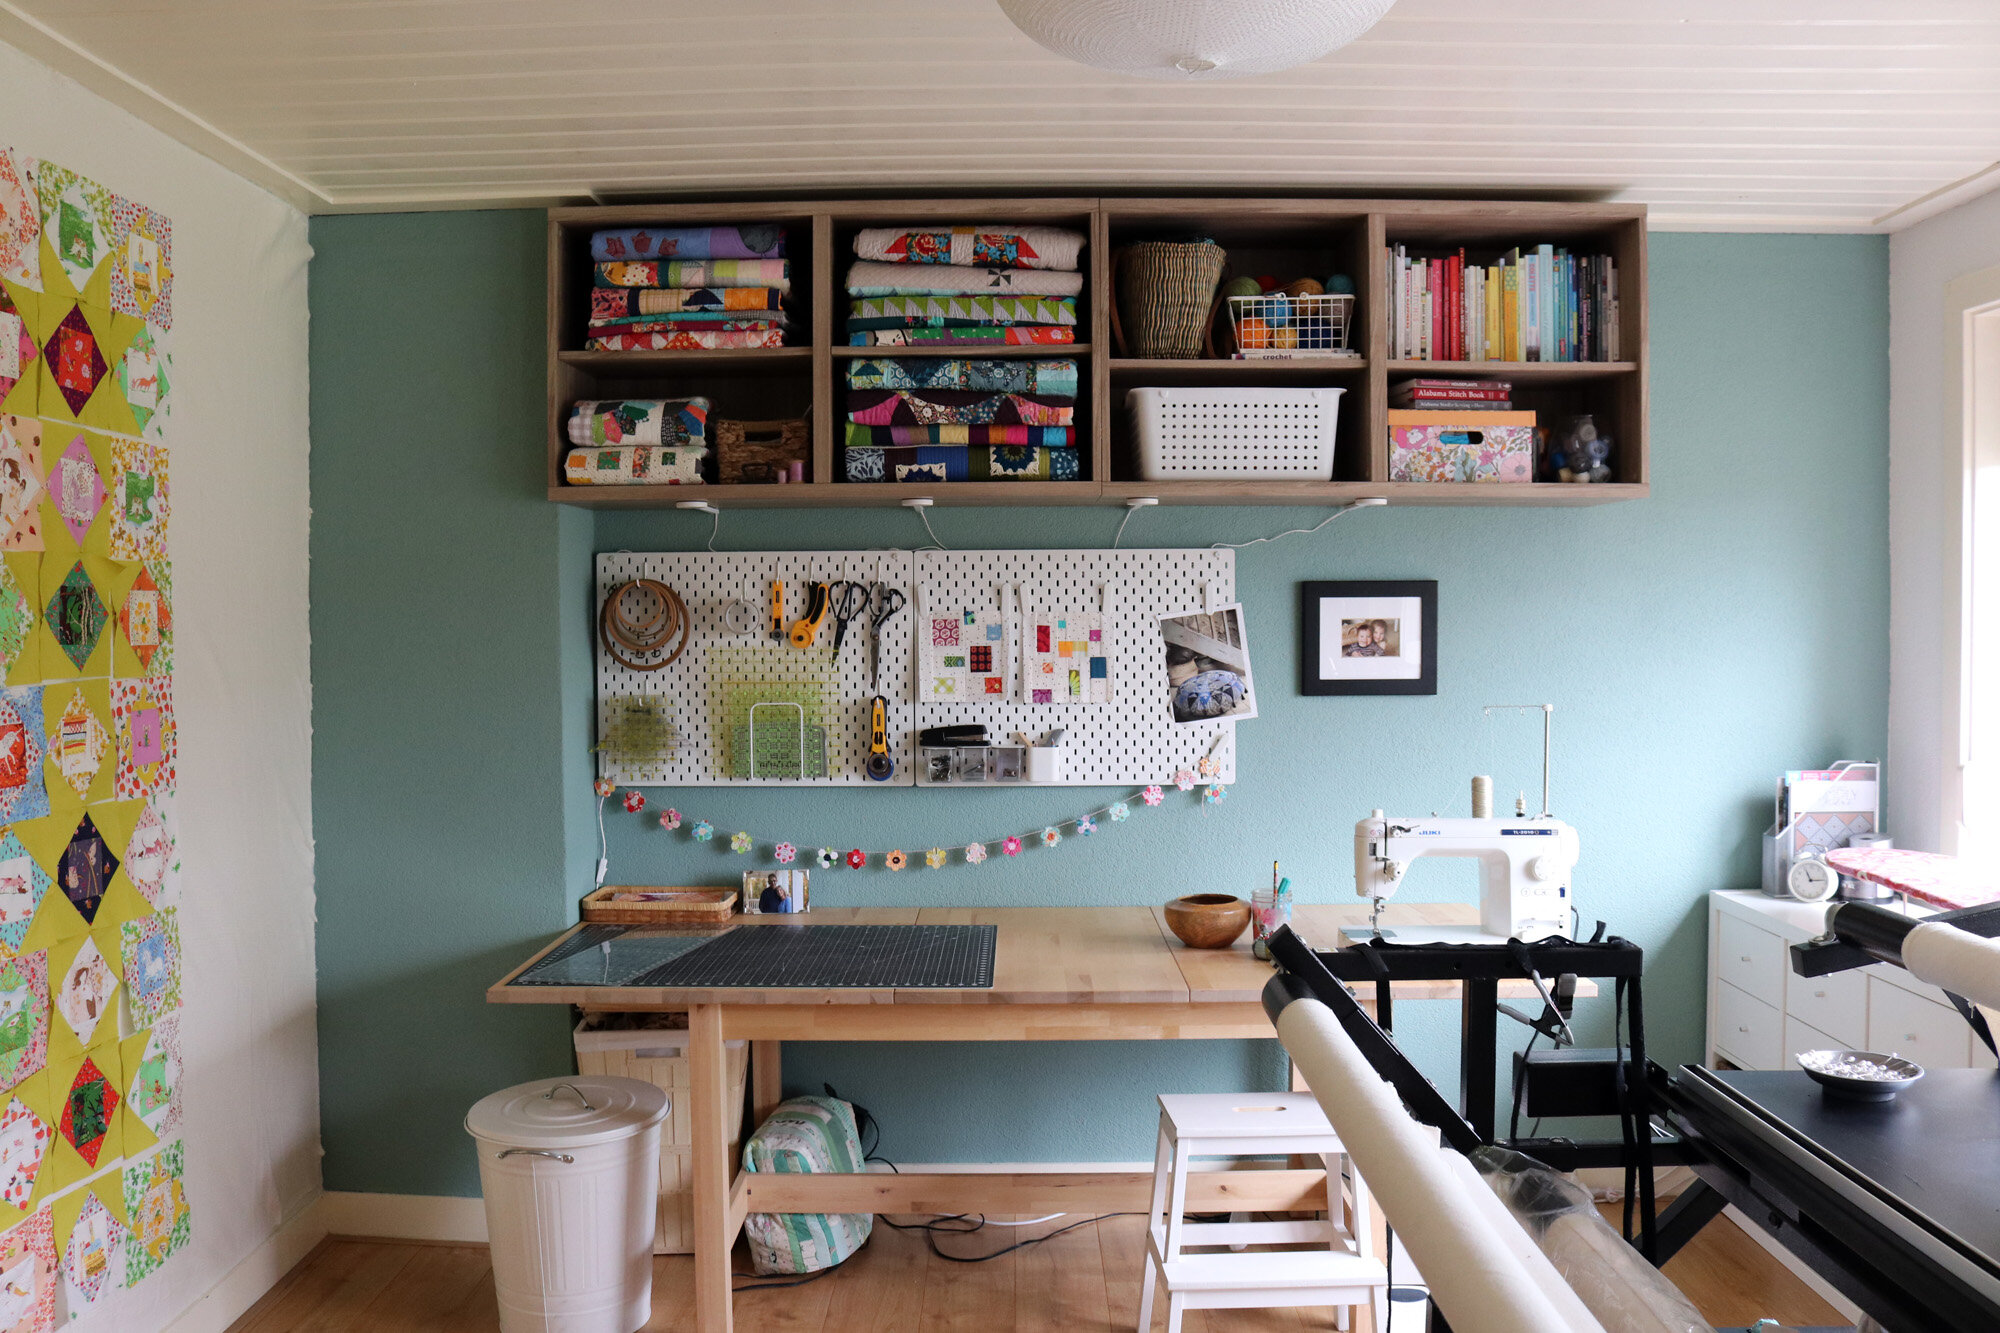 Sewing Room Ideas - Superlabelstore